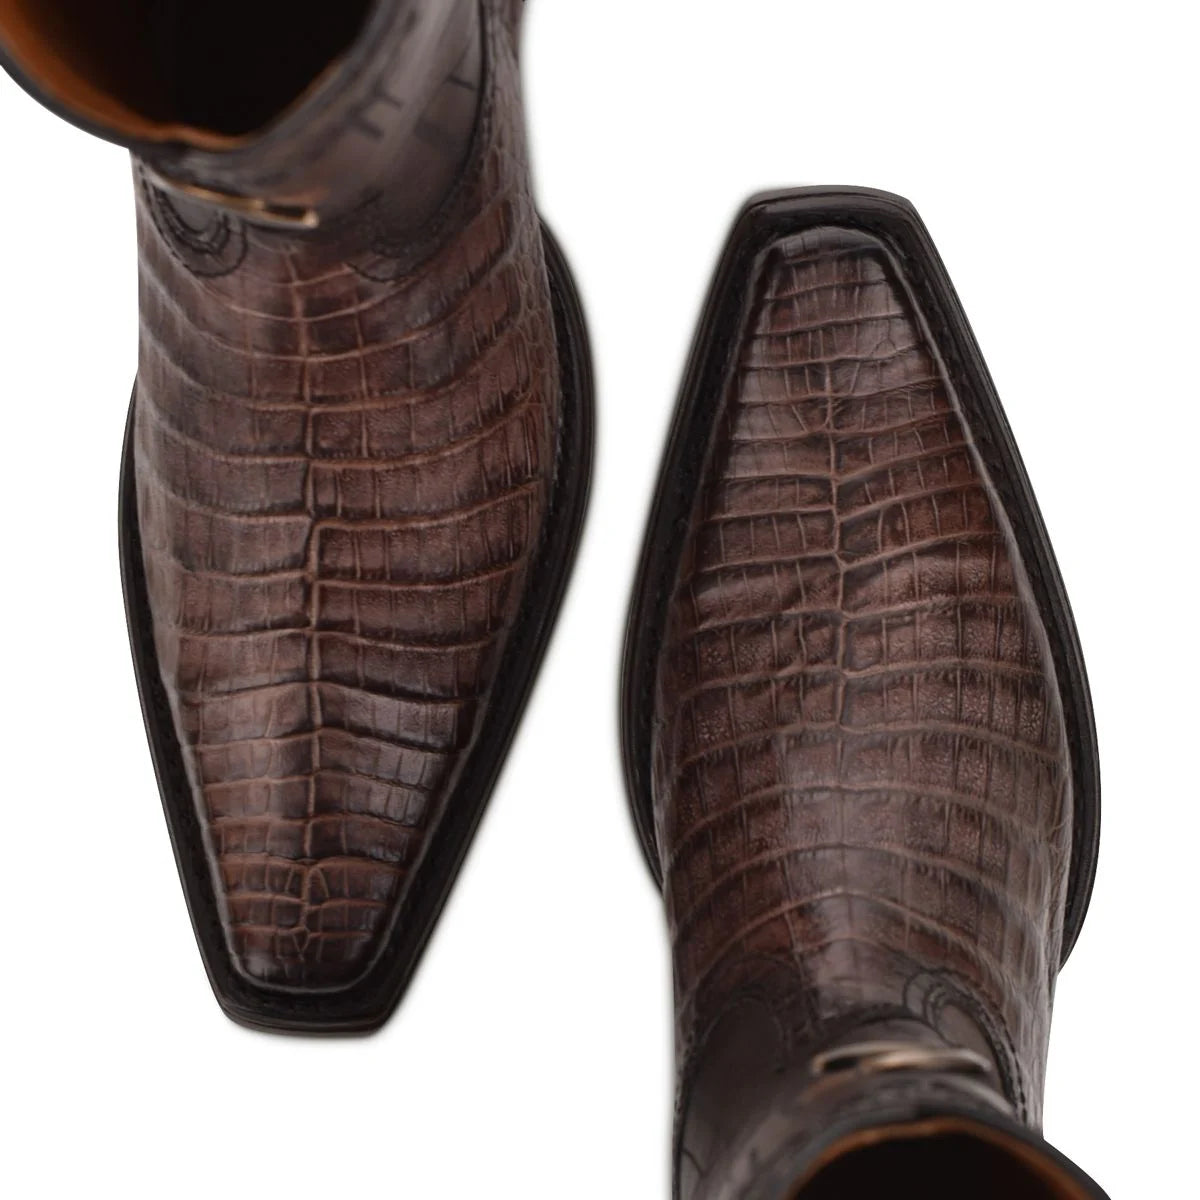 Engraved exotic dark brown leather boot